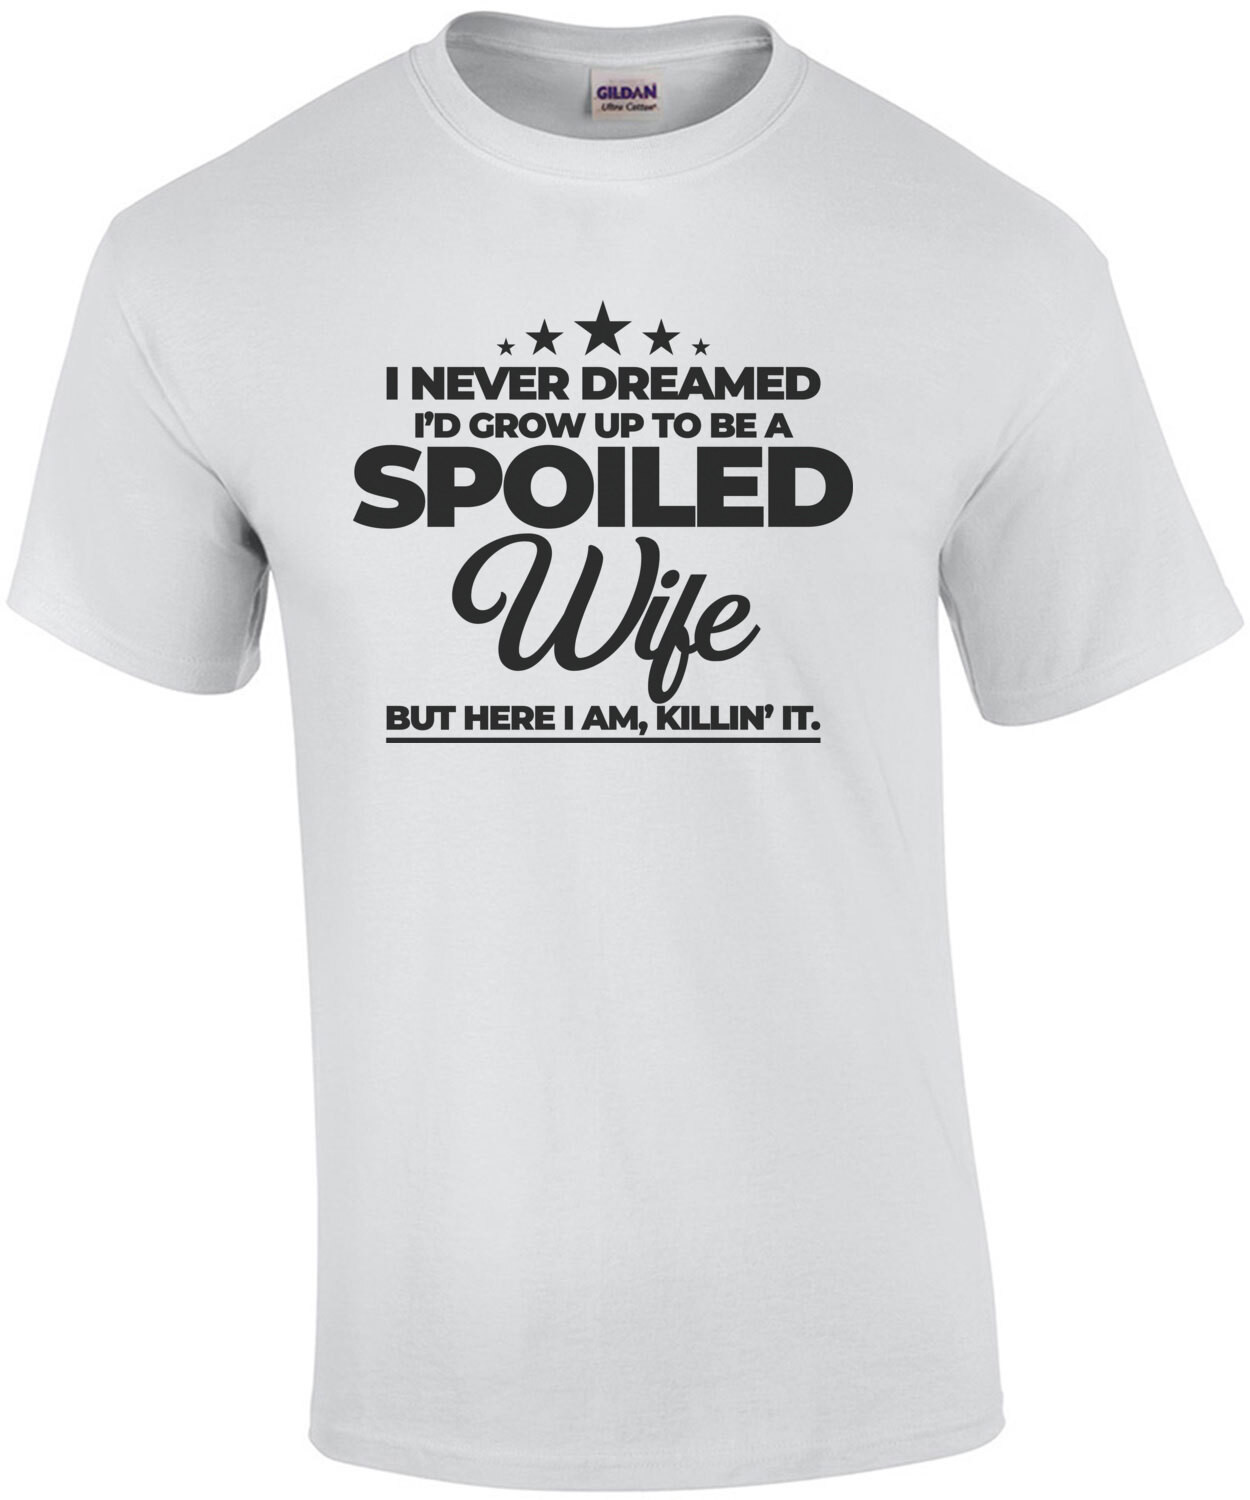 I never dreamed I'd grow up to be a spoiled wife but here I am, killin' it. Funny wife T-Shirt